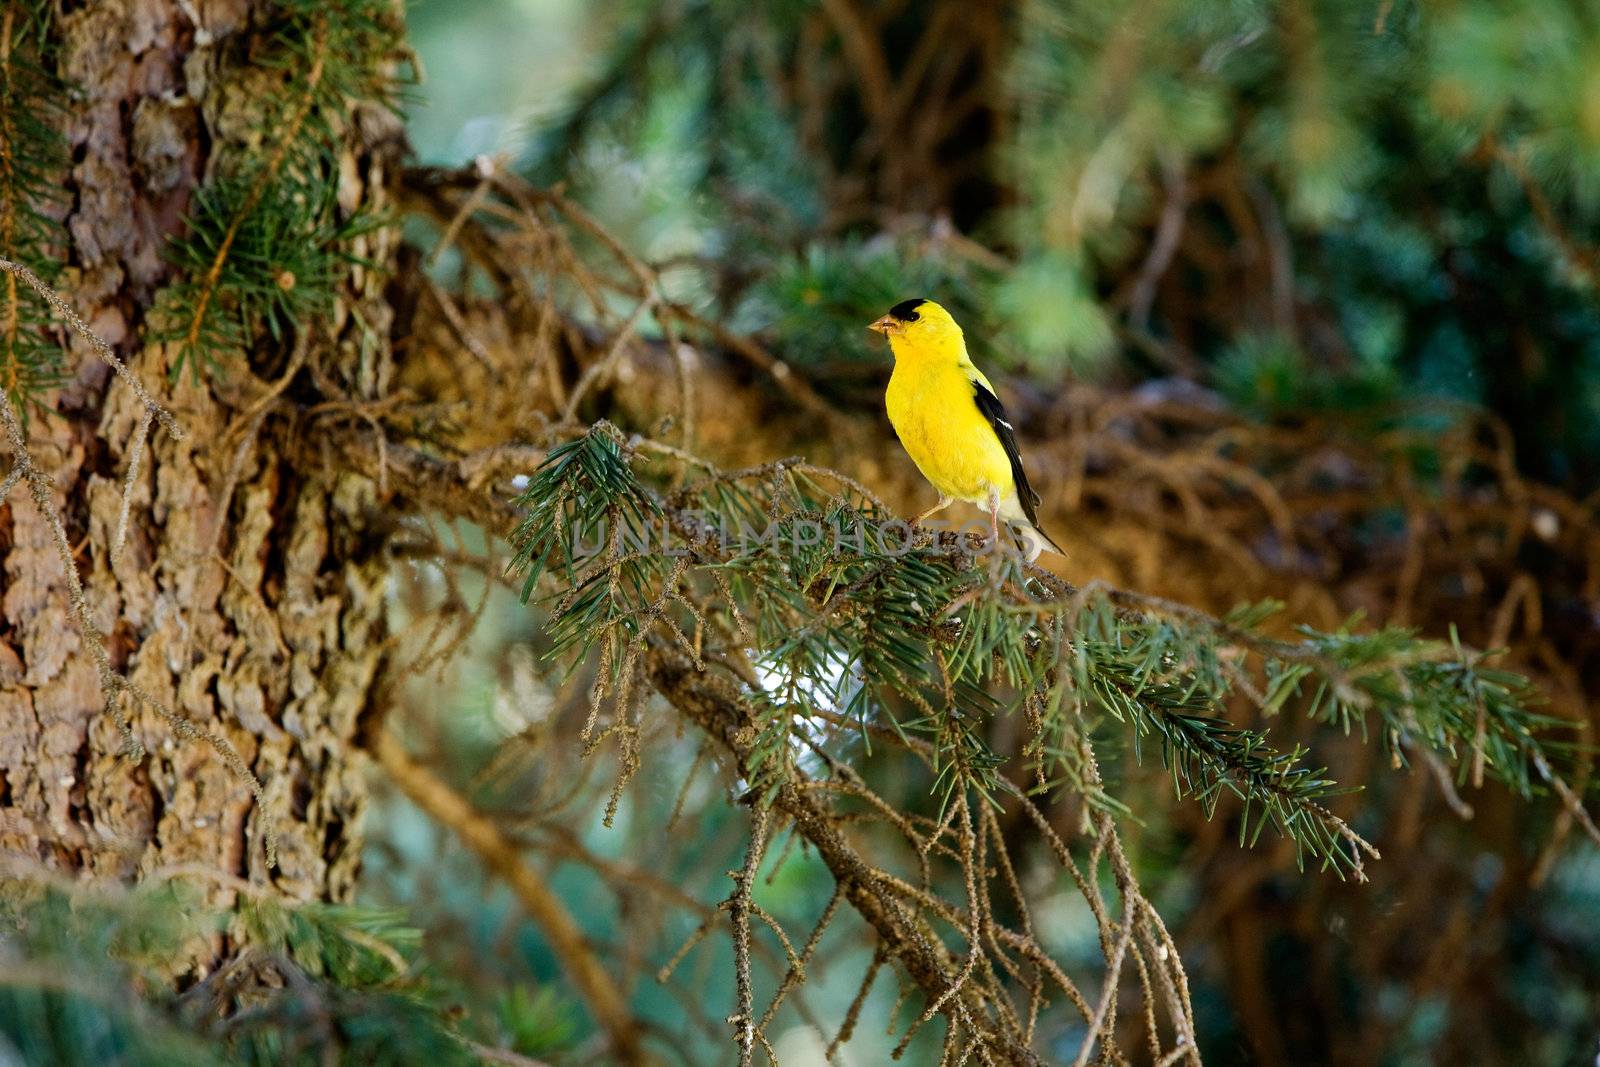 A gold finch in the forest sitting on a tree